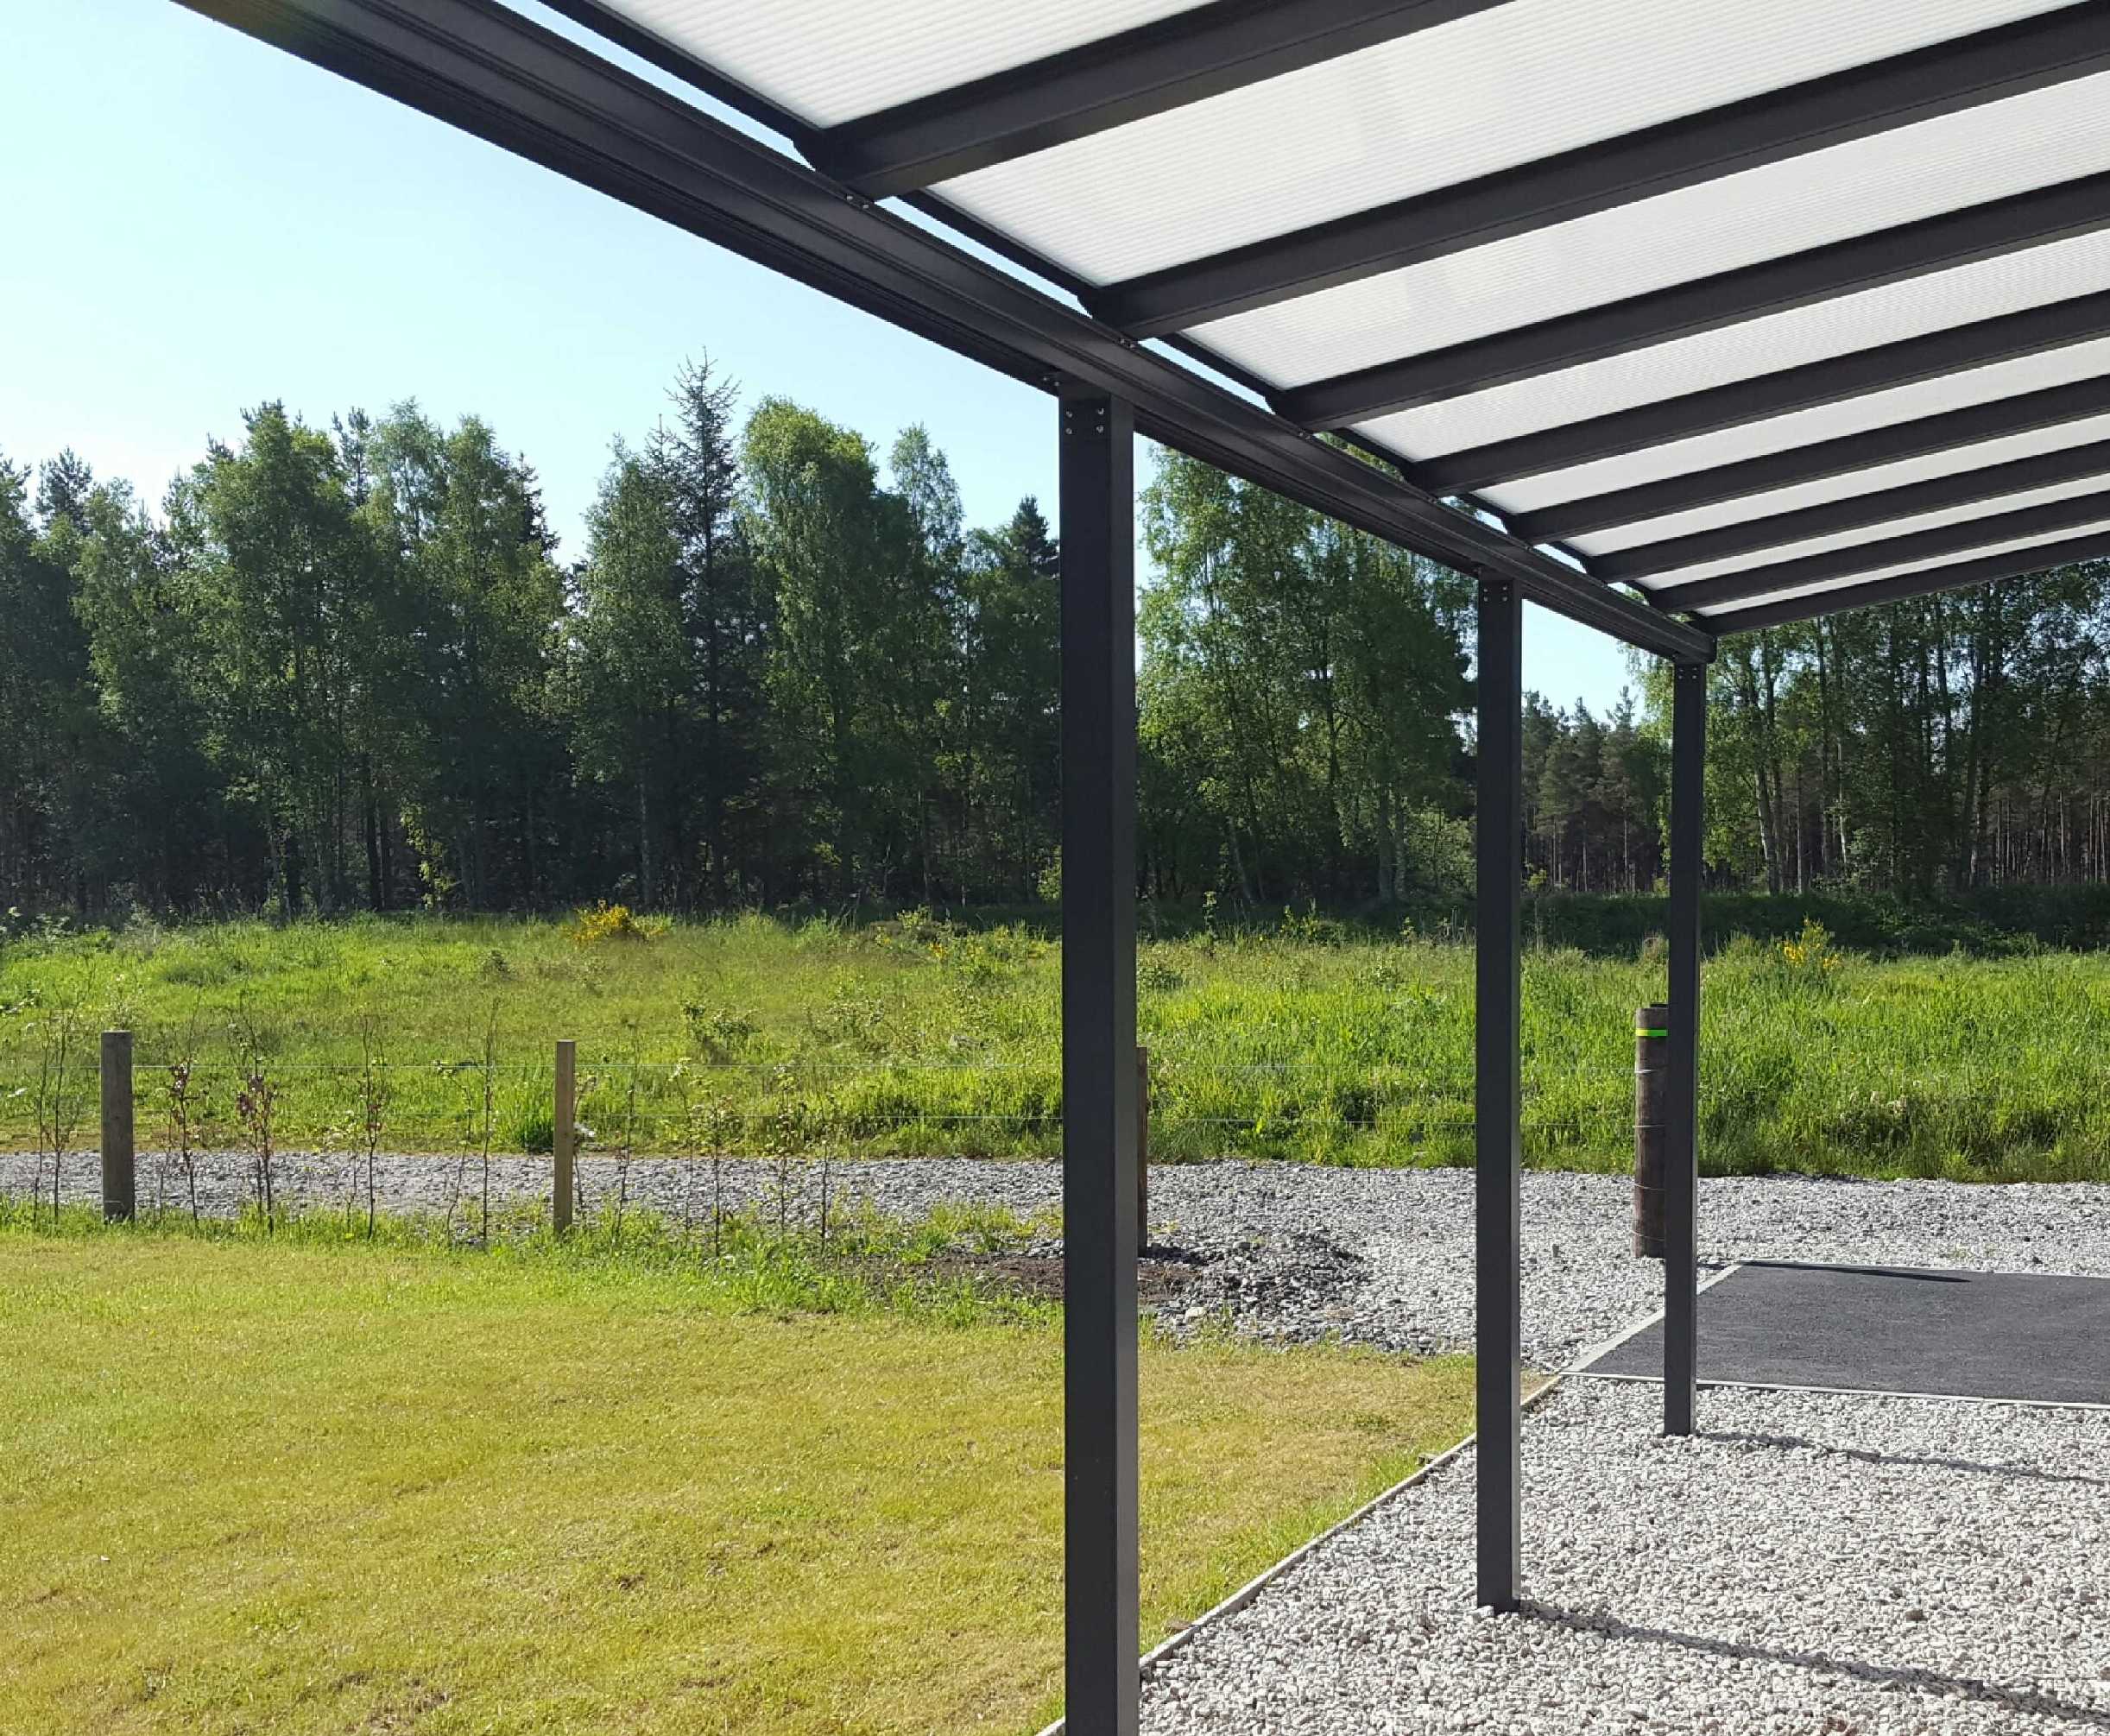 SPECIAL OFFER Omega Smart Lean-To Canopy, Anthracite Grey, 16mm Polycarbonate Glazing - 6.0m (W) x 3.0m (P), (3) Supporting Posts